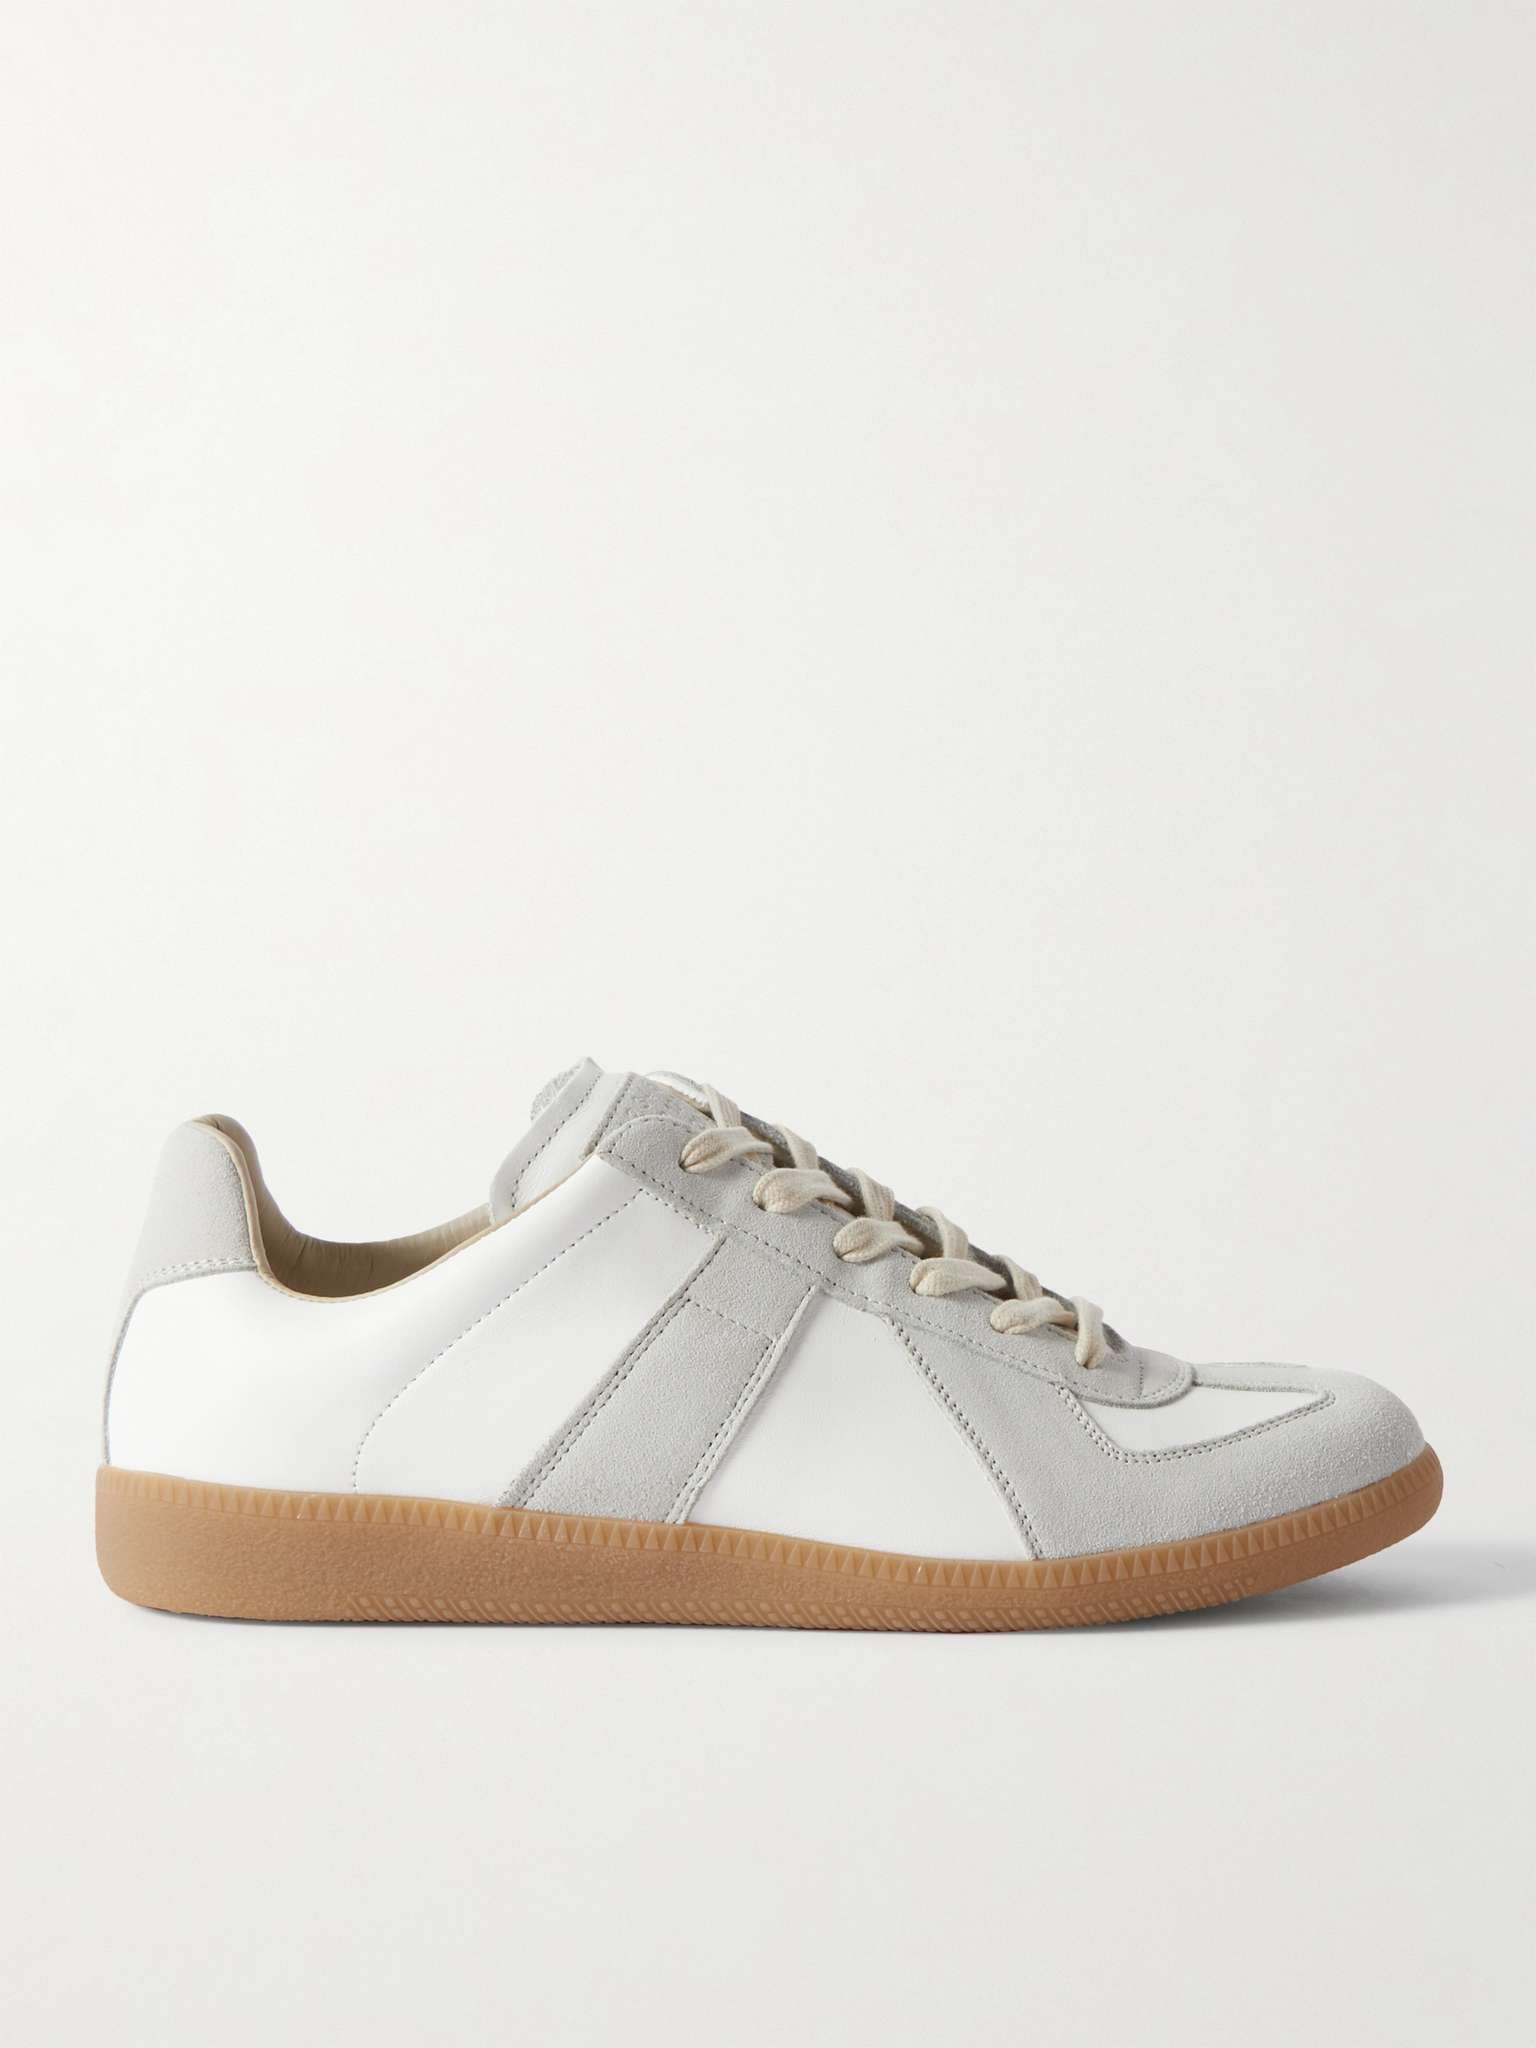 Replica Leather and Suede Sneakers - 1